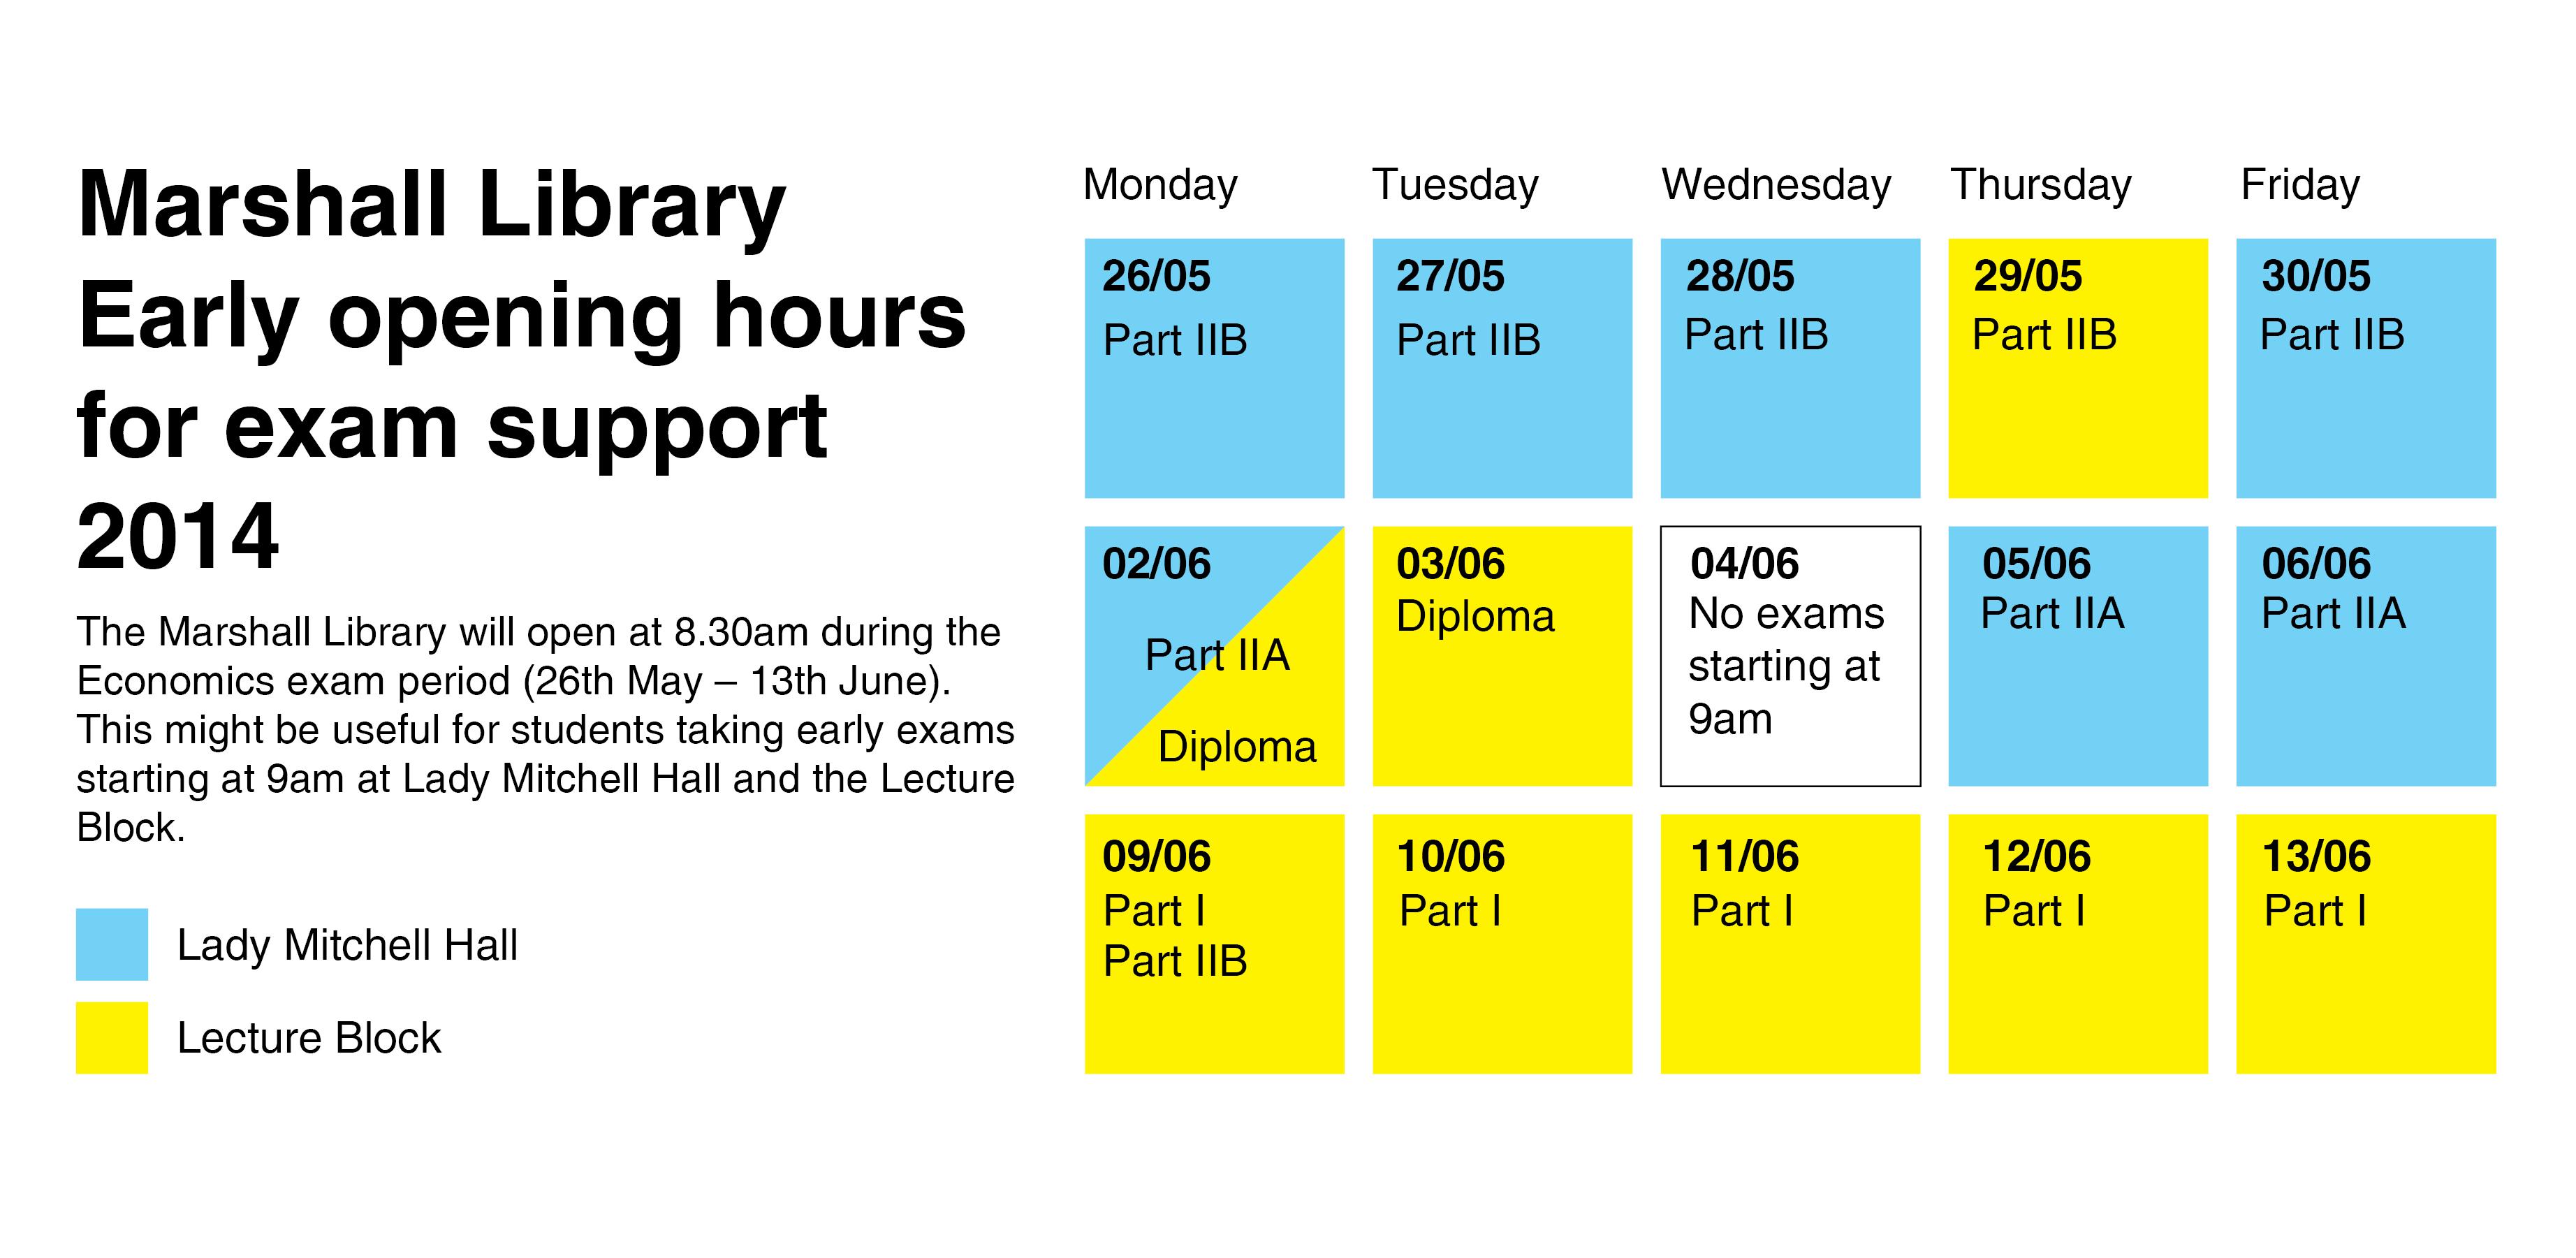 Exam Support - opening Mon-Fri: 8:30 between 26 May 2014 and 13 June 2014